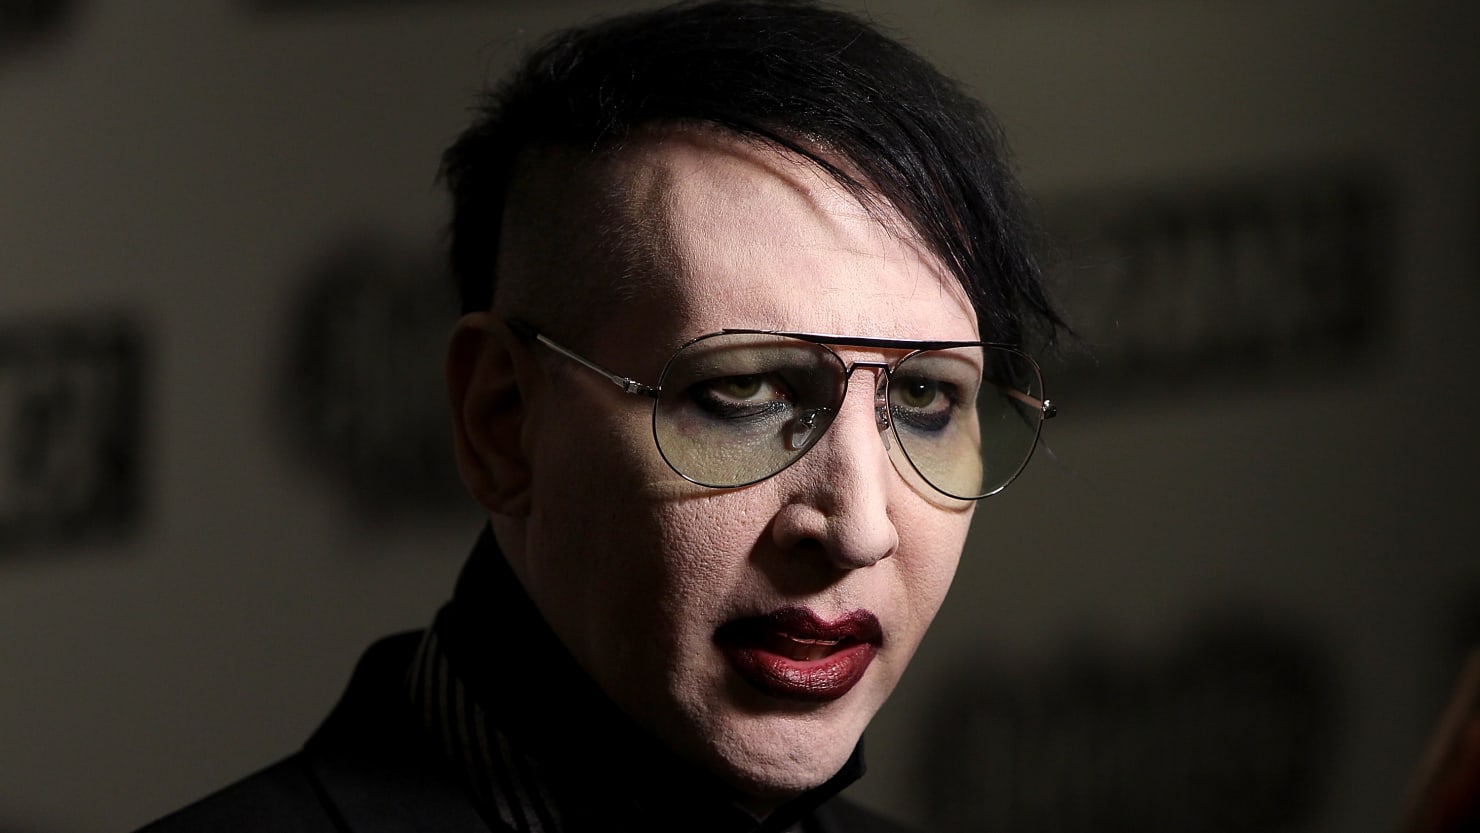 Watch Rough Rape Sex - Marilyn Manson Raped Ex-Girlfriend, Forced Her to Watch Violent Home Video  of Himself: Lawsuit